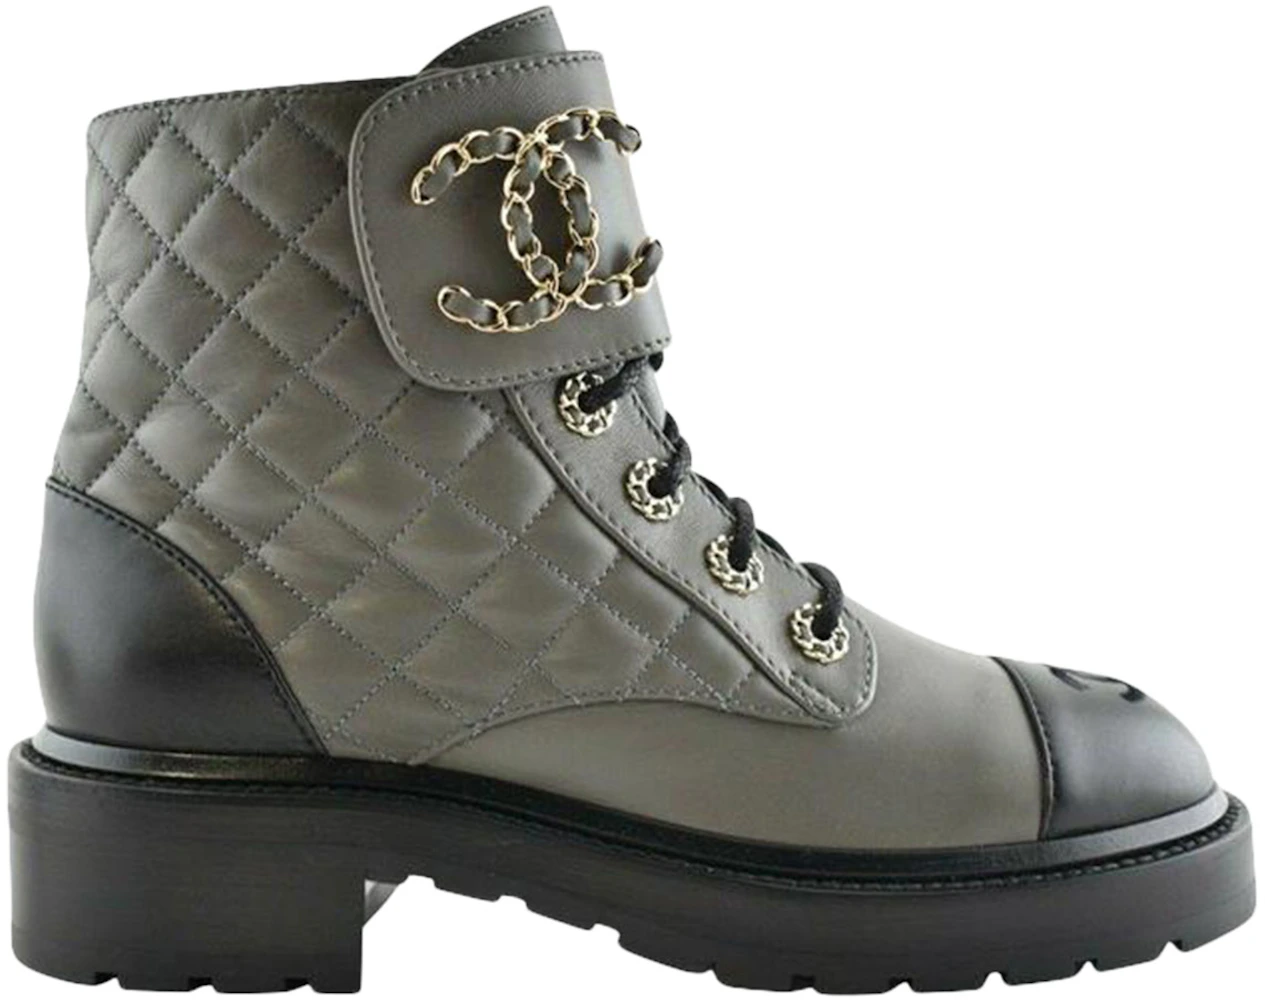 Chanel Button Boots for Women